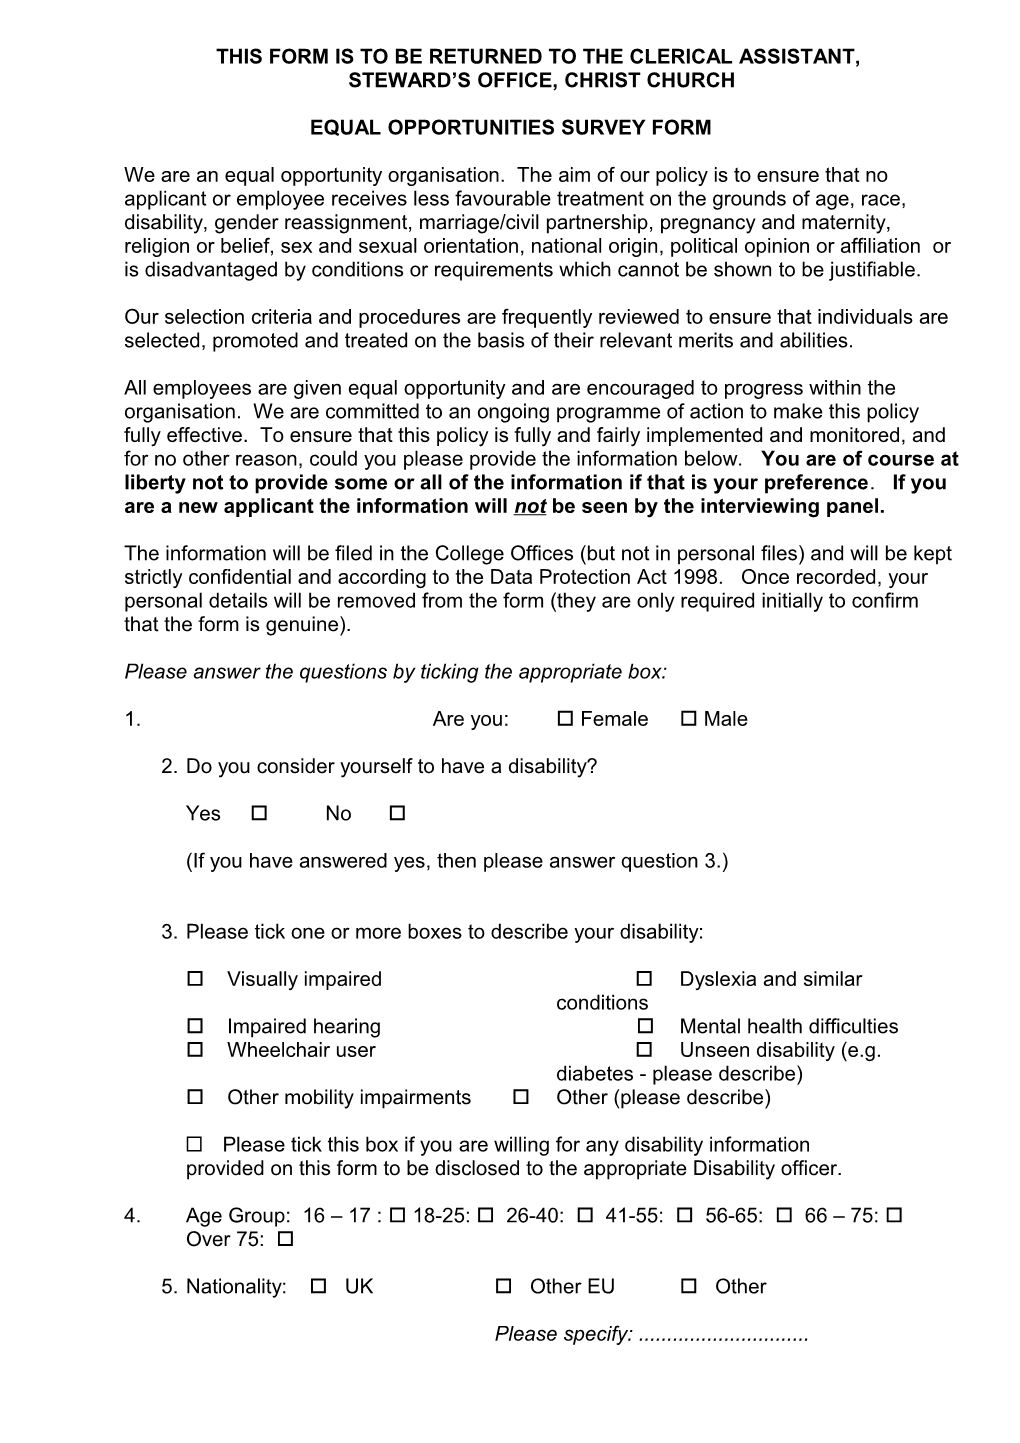 This Form to Be Returned to the Personnel Assistant